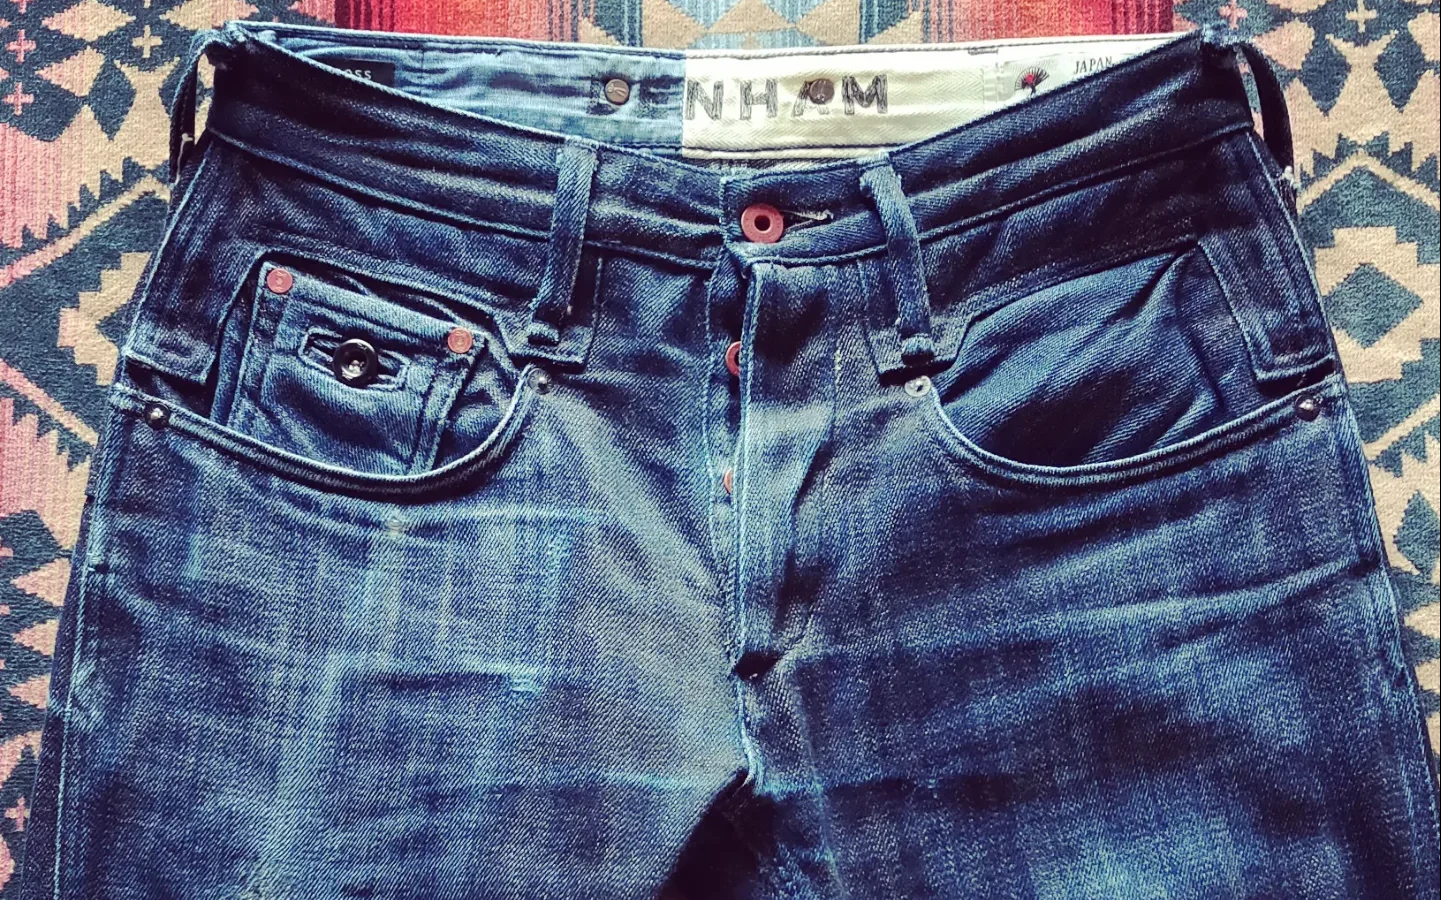 Recommended jeans aging/discoloration media | MOMENTUM